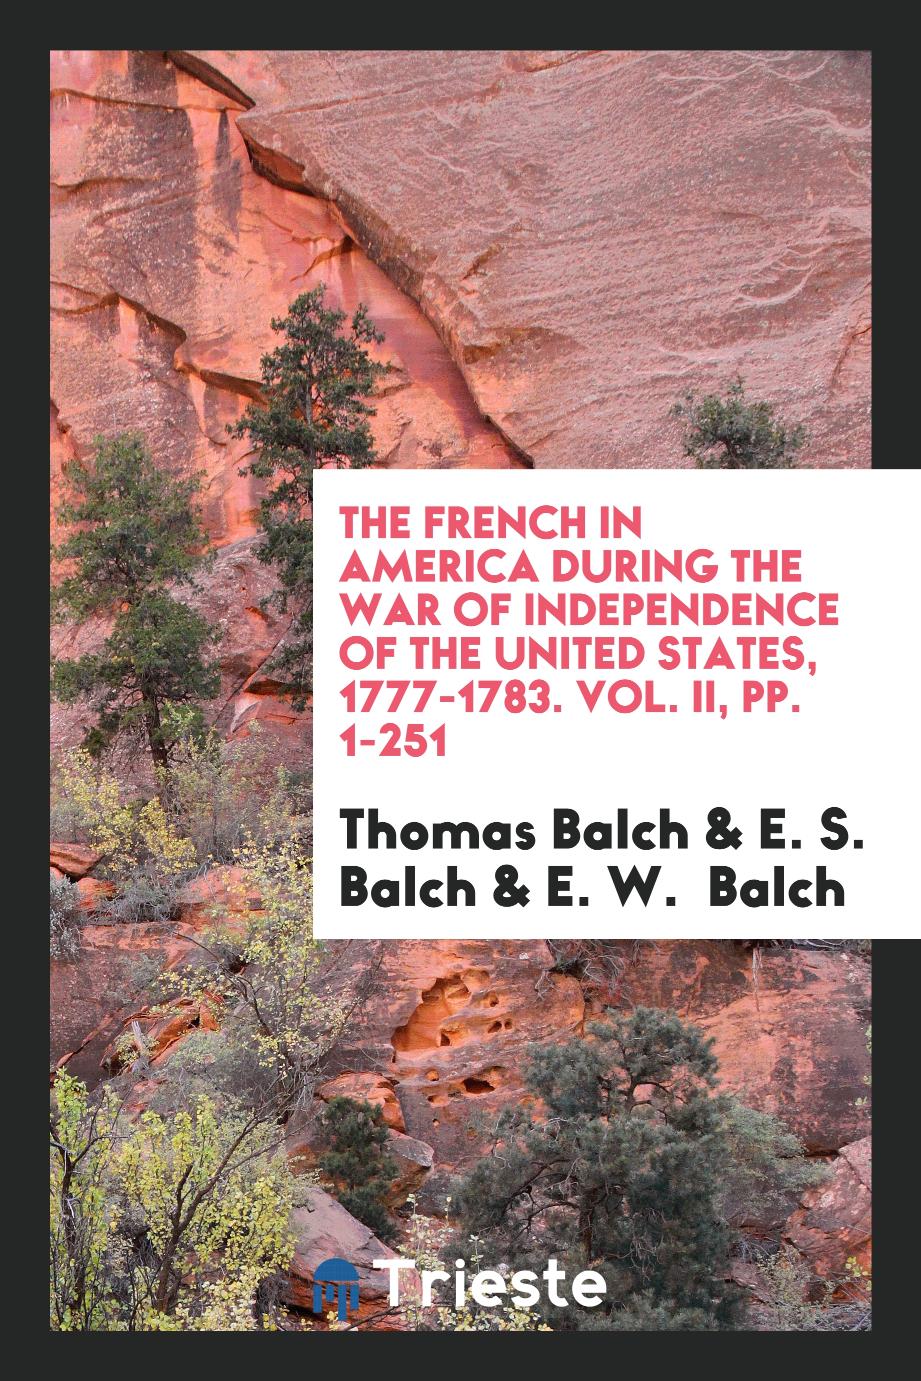 The French in America During the War of Independence of the United States, 1777-1783. Vol. II, pp. 1-251